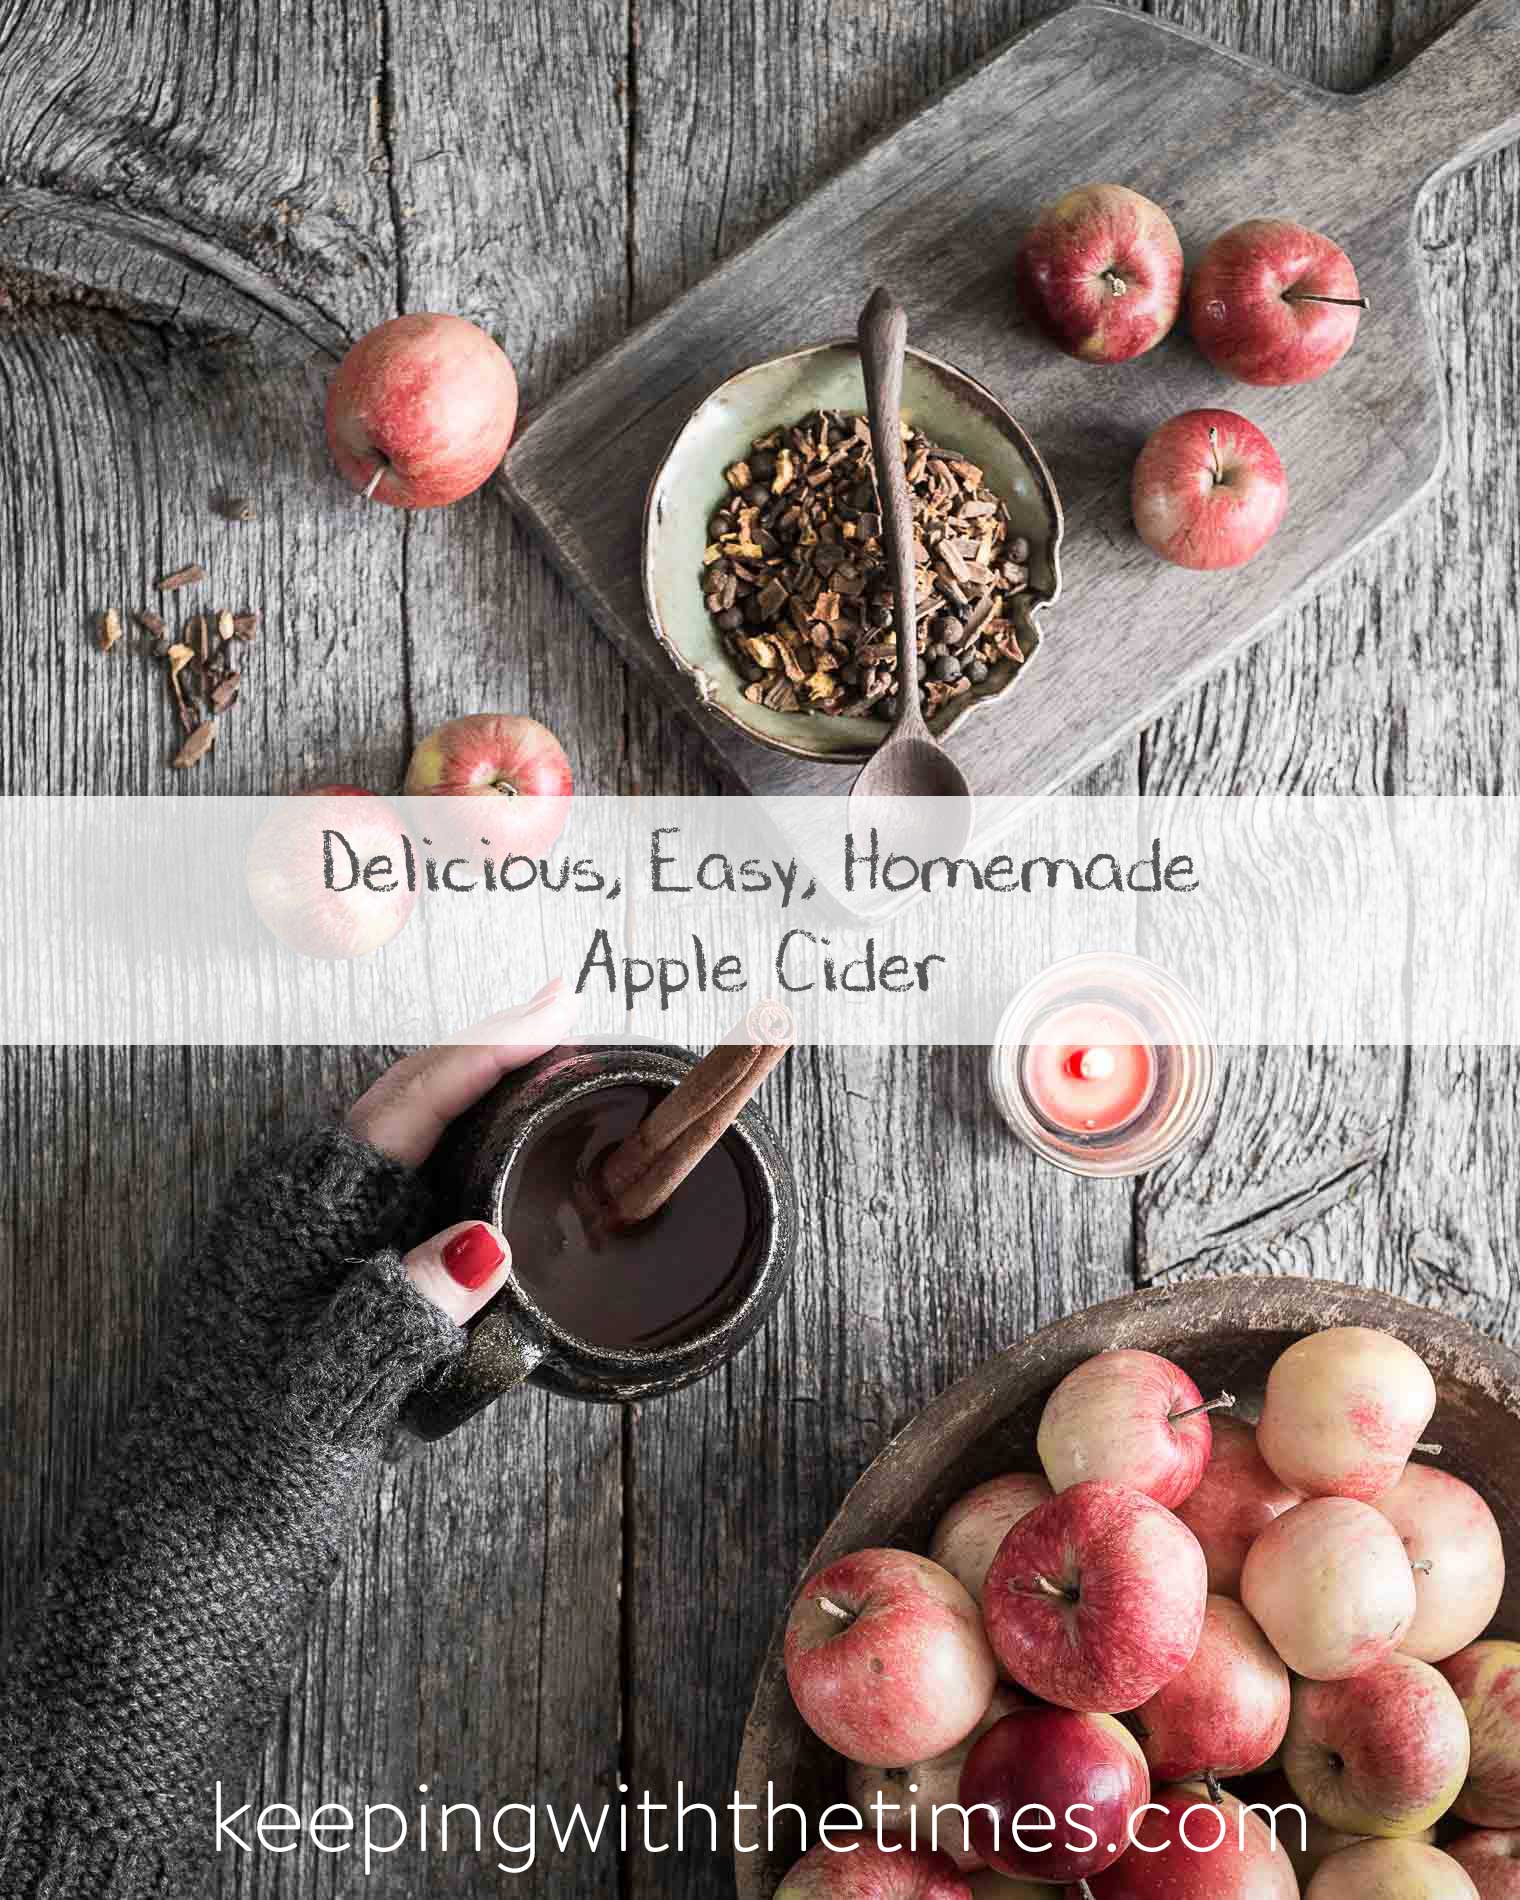 Homemade apple cider is so easy to make, I’m shocked I haven’t tried it before! But I suppose the only time I'd think about making apple cider is when I have so many apples I don't know what to do with them—which is what happened this year. Keeping With the Times